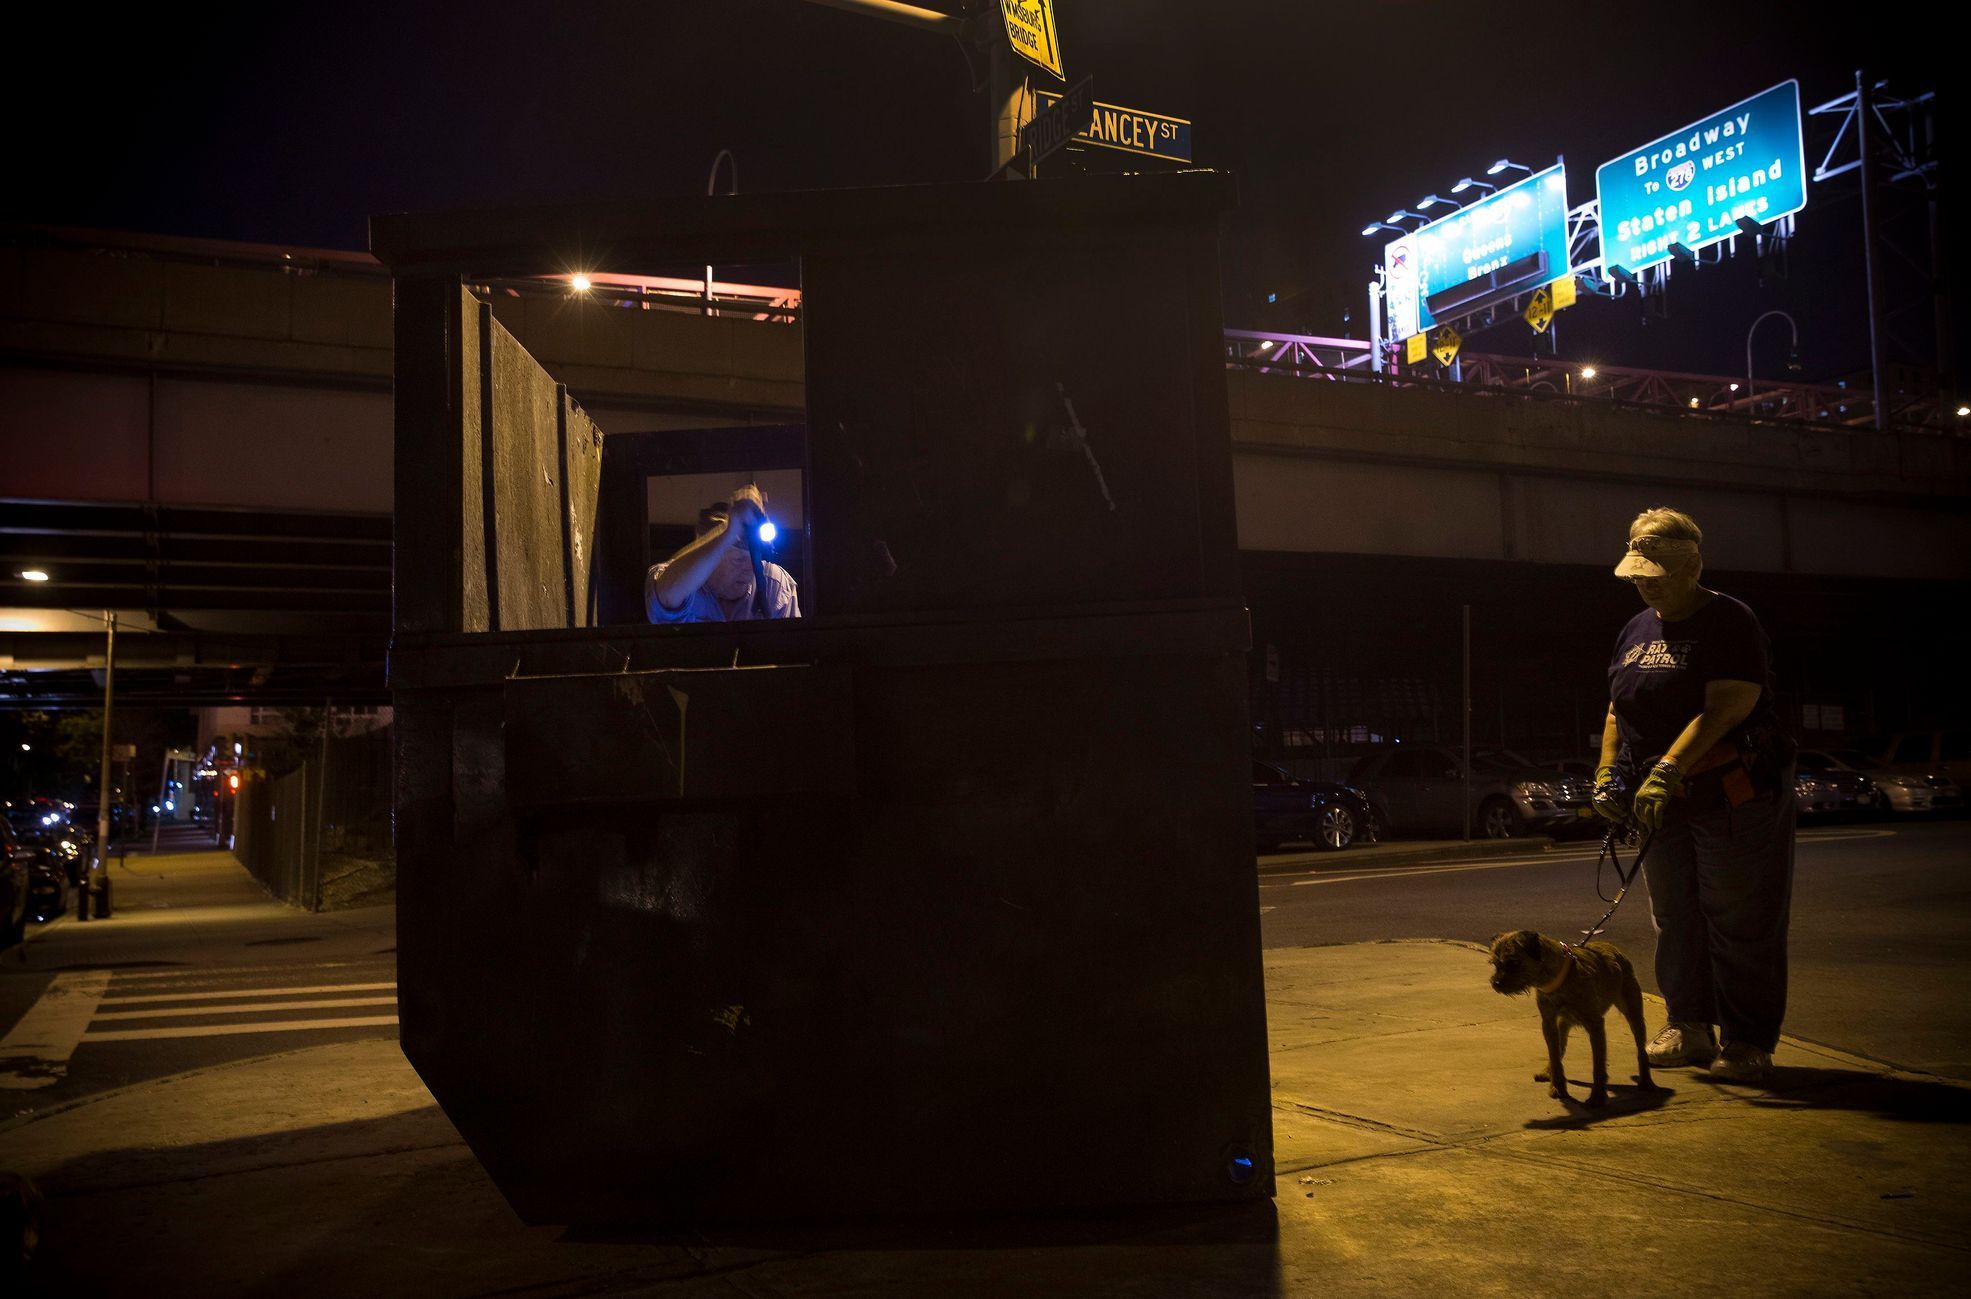 Reynolds of the Ryders Alley Trencher-fed Society, uses a flashlight to look for rats in a dumpster as Judy and her Border Terrier Merlin stand by, ready to make a kill, during organized rat hunt on N